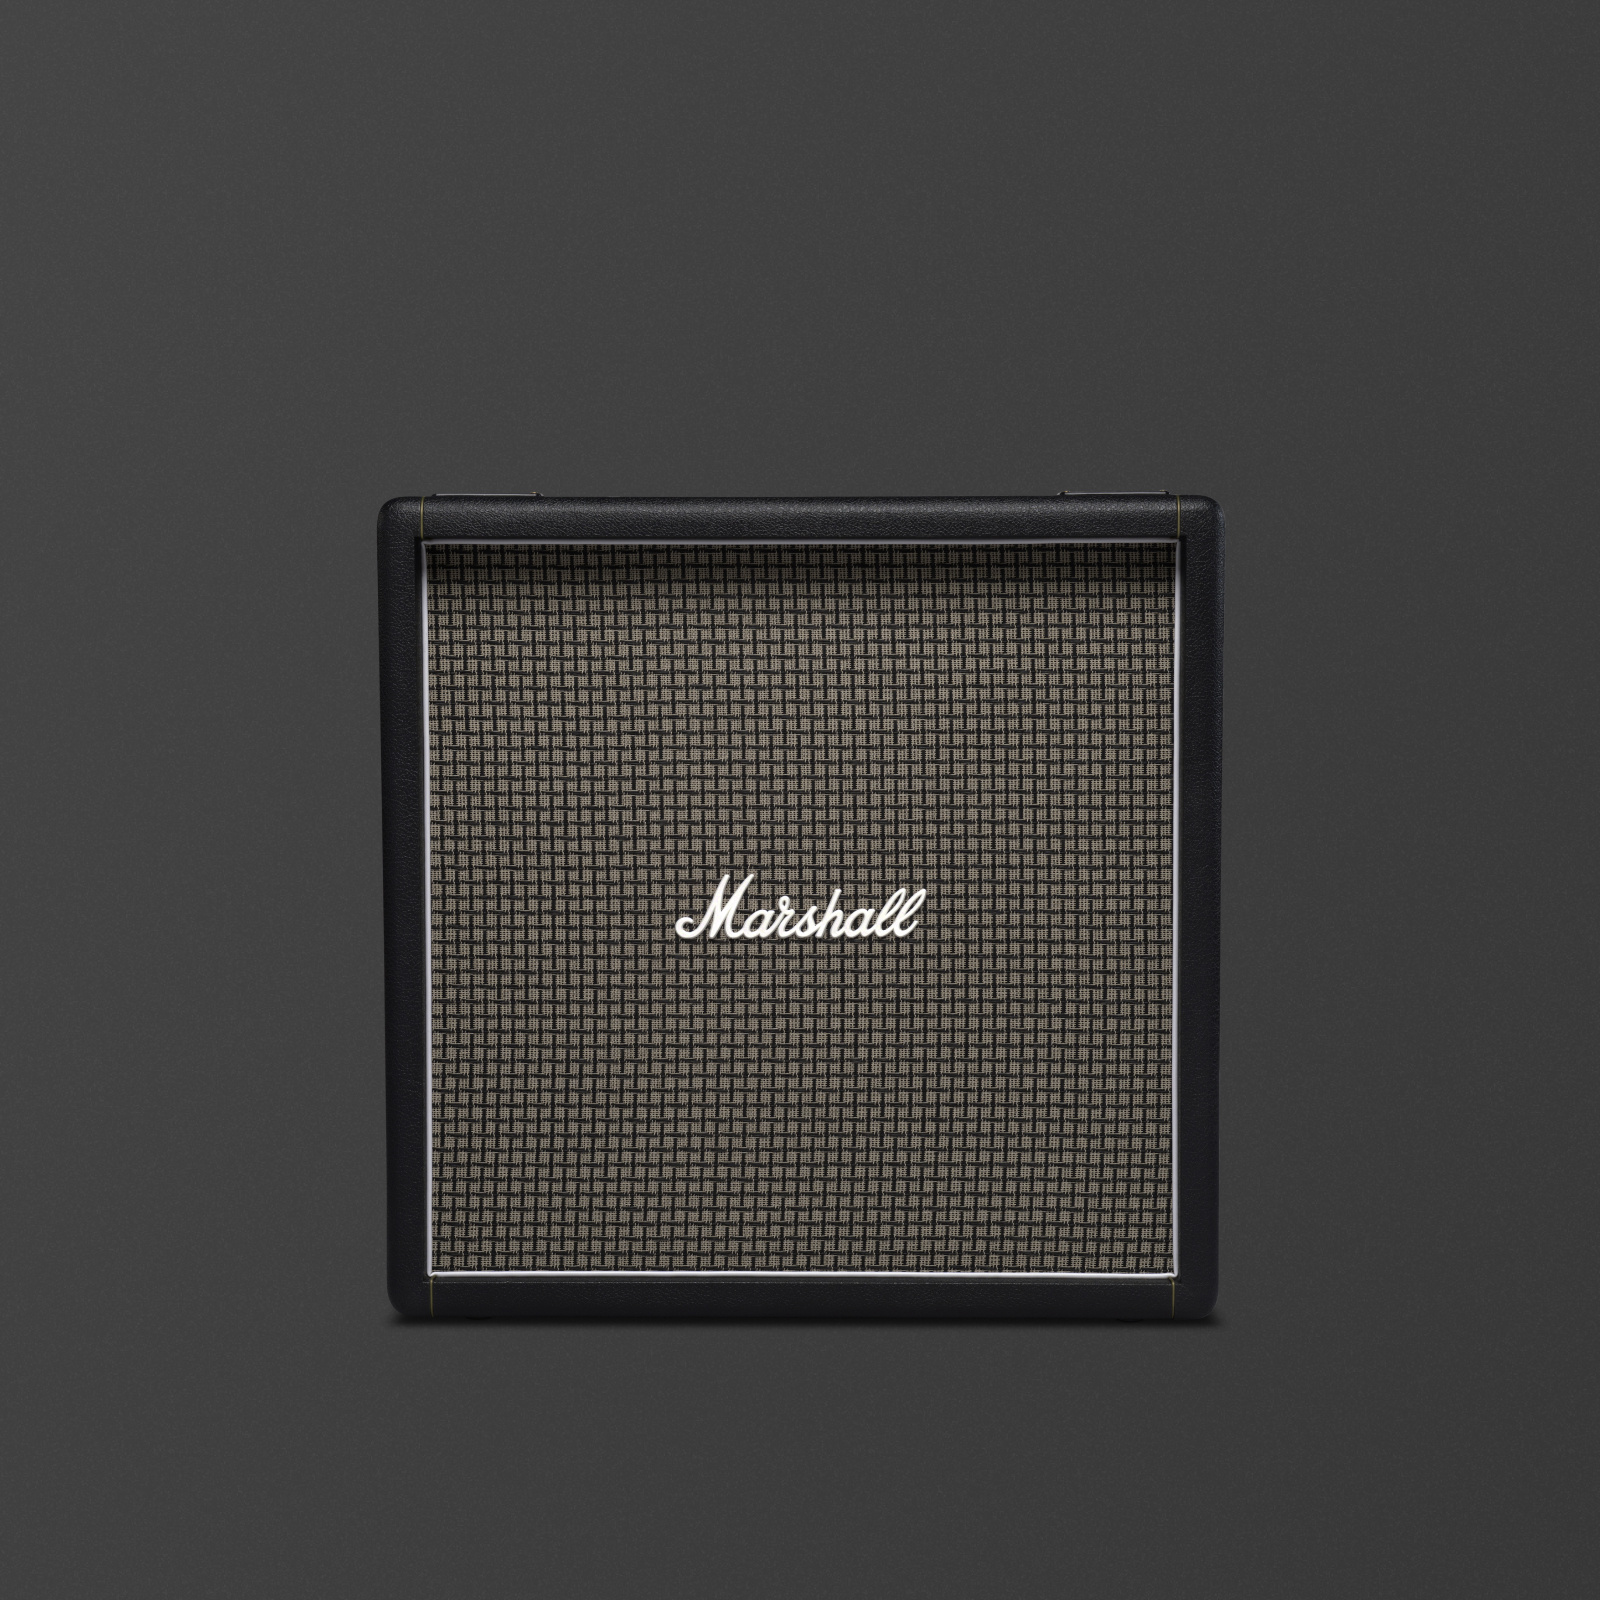 Marshall's 1960BX cabinet with a chequered 70's grill cloth.  